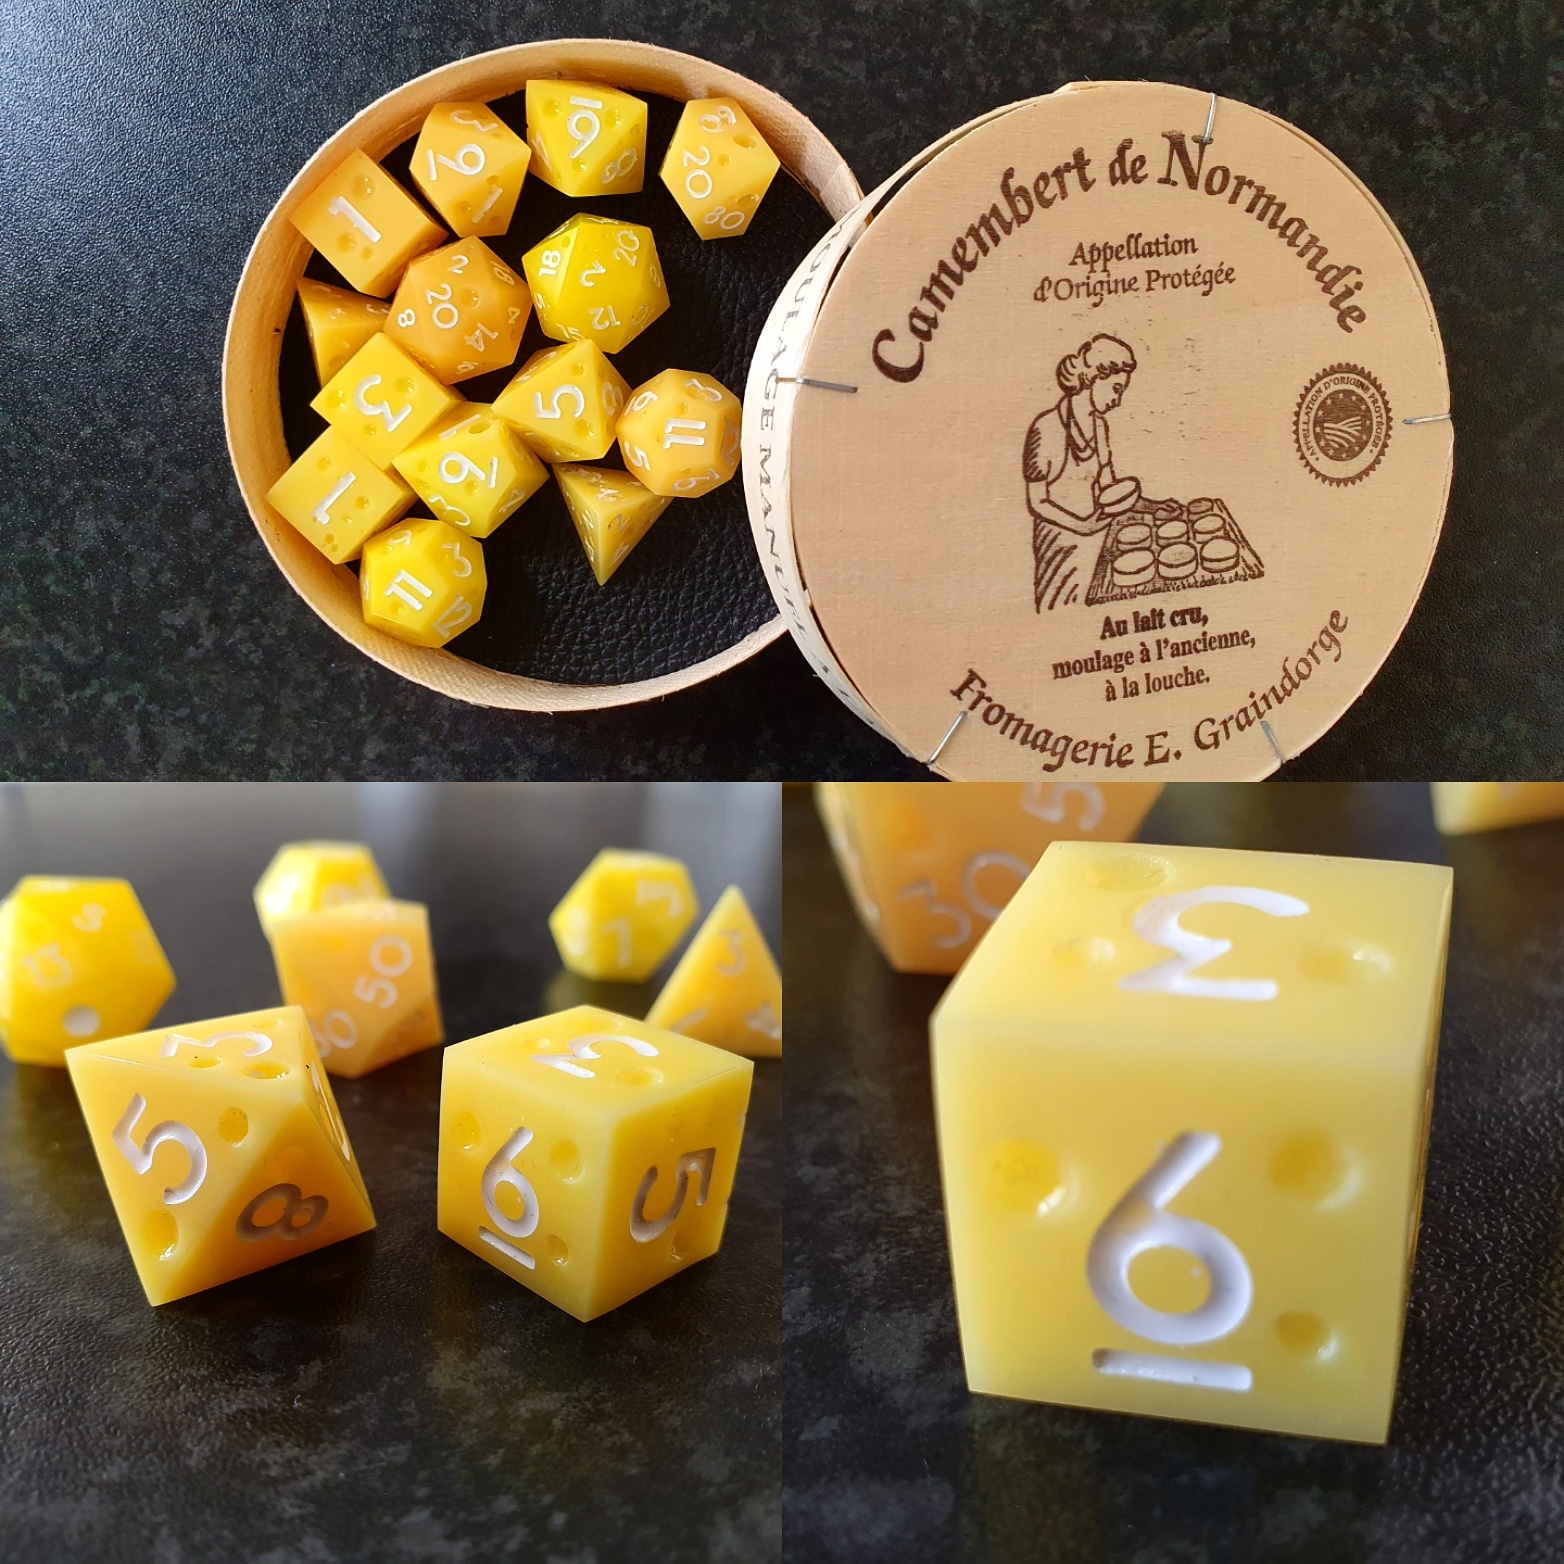 The true story behind cheese dice sets for D&D